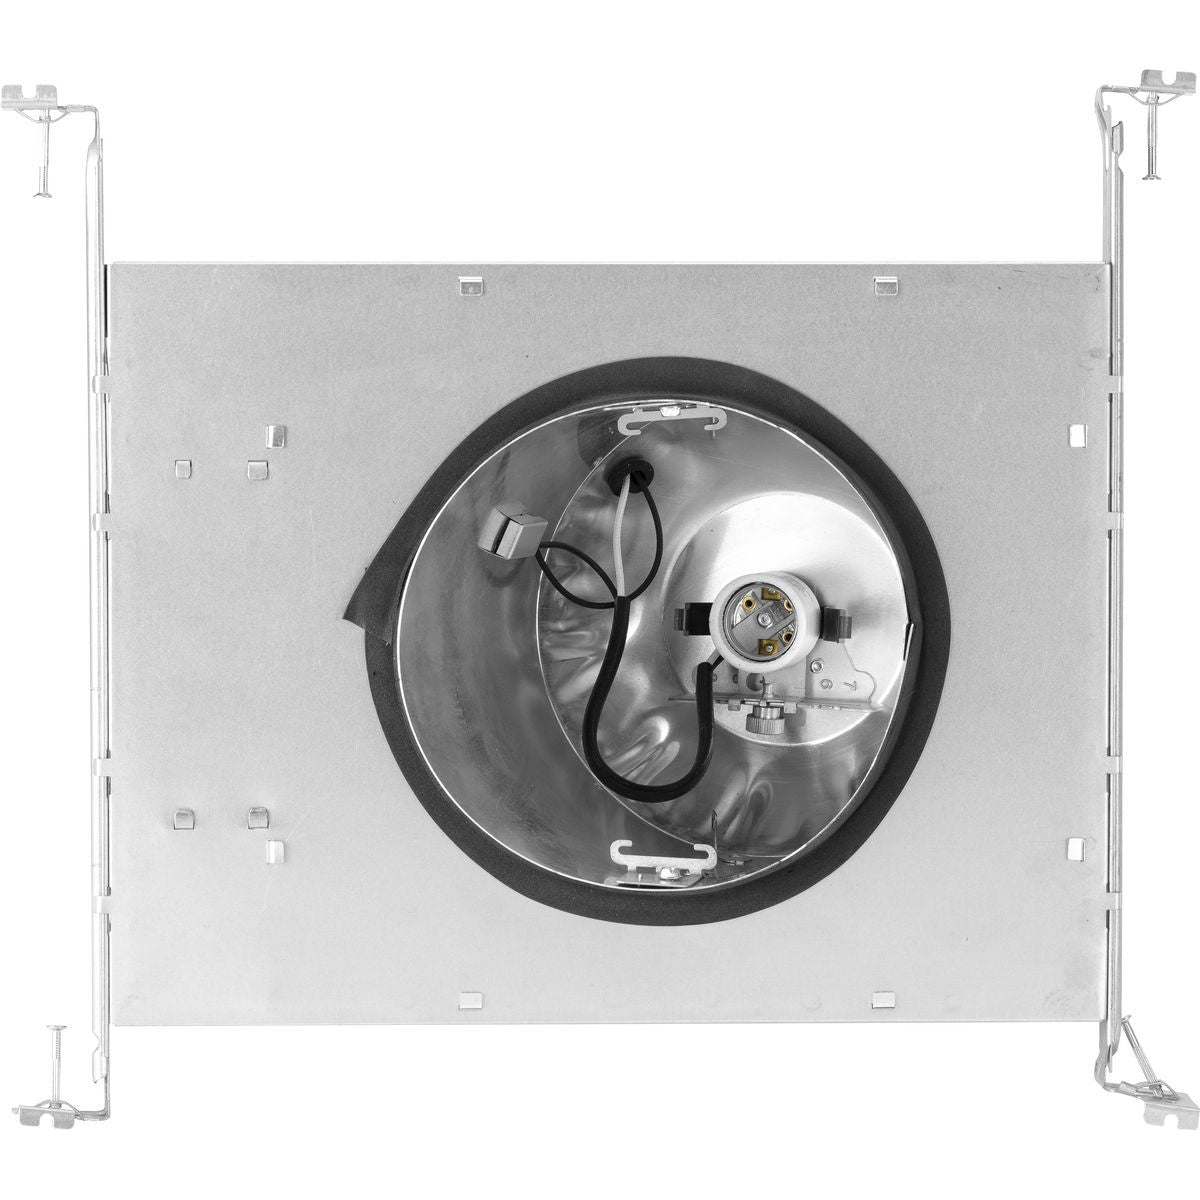 6" Recessed Slope New Air-Tight IC Housing